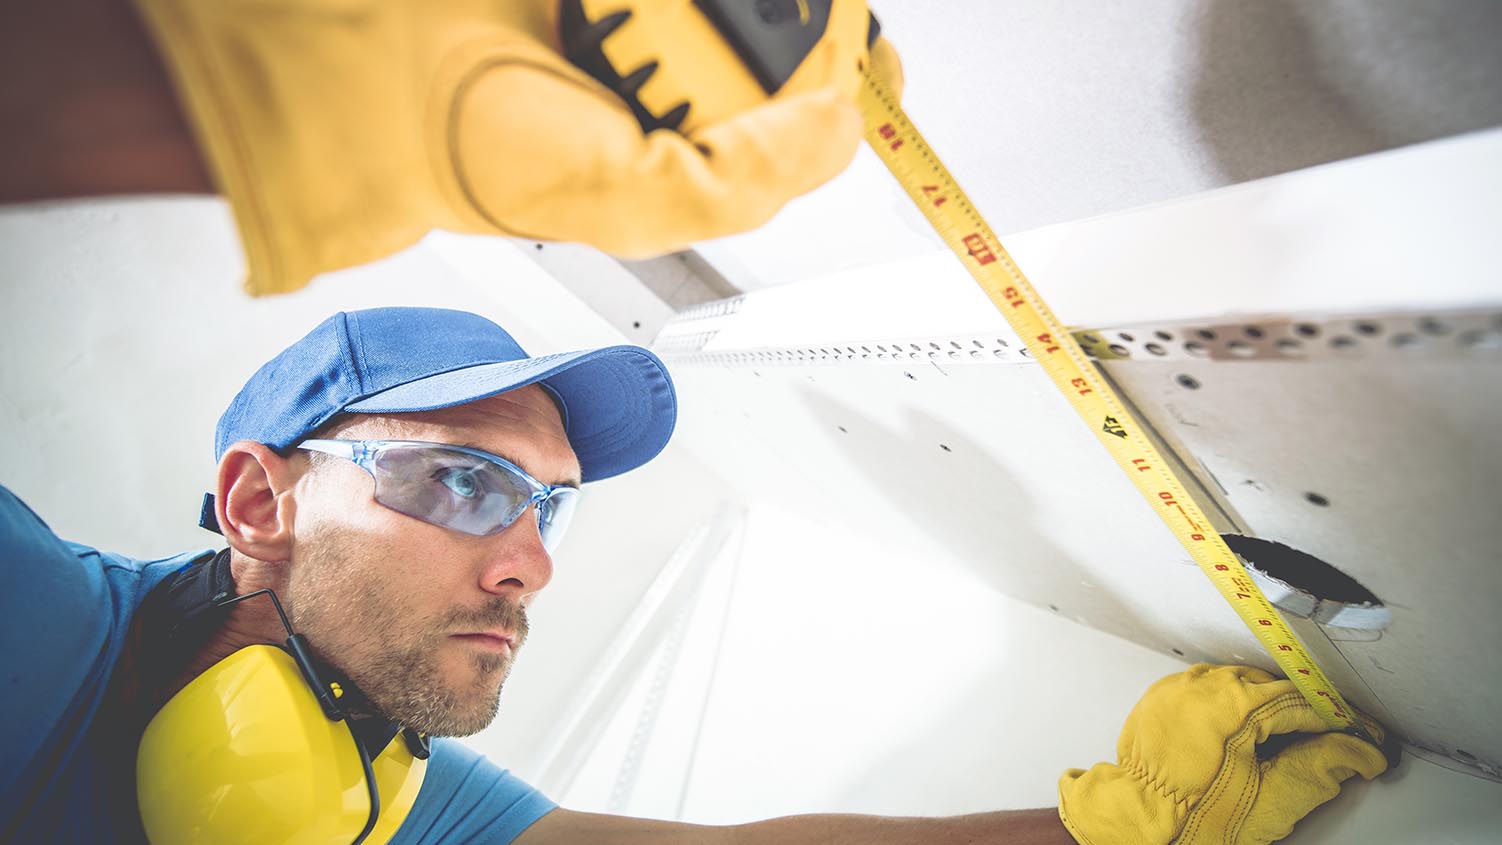 image of a worker wearing safety glasses, hearing protection, and safety gloves using a measuring tape